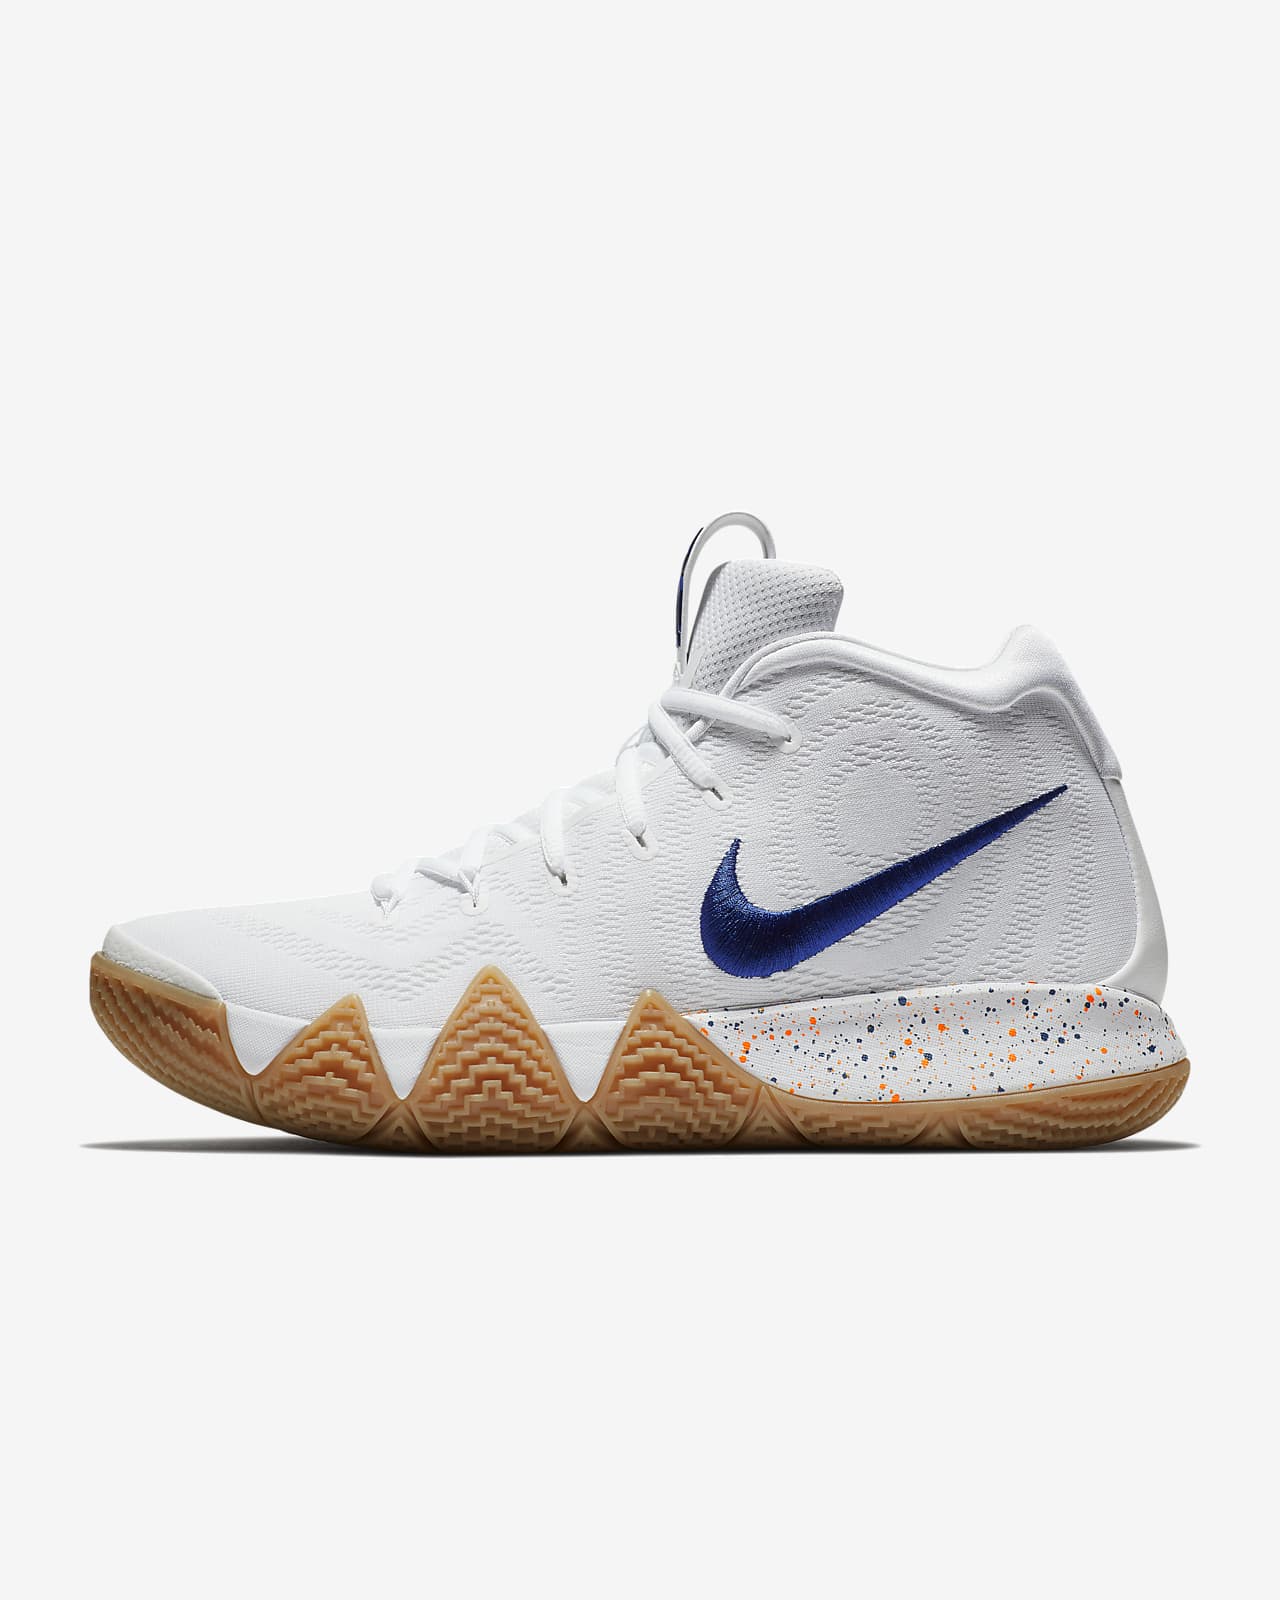 kyrie 4 mens shoes